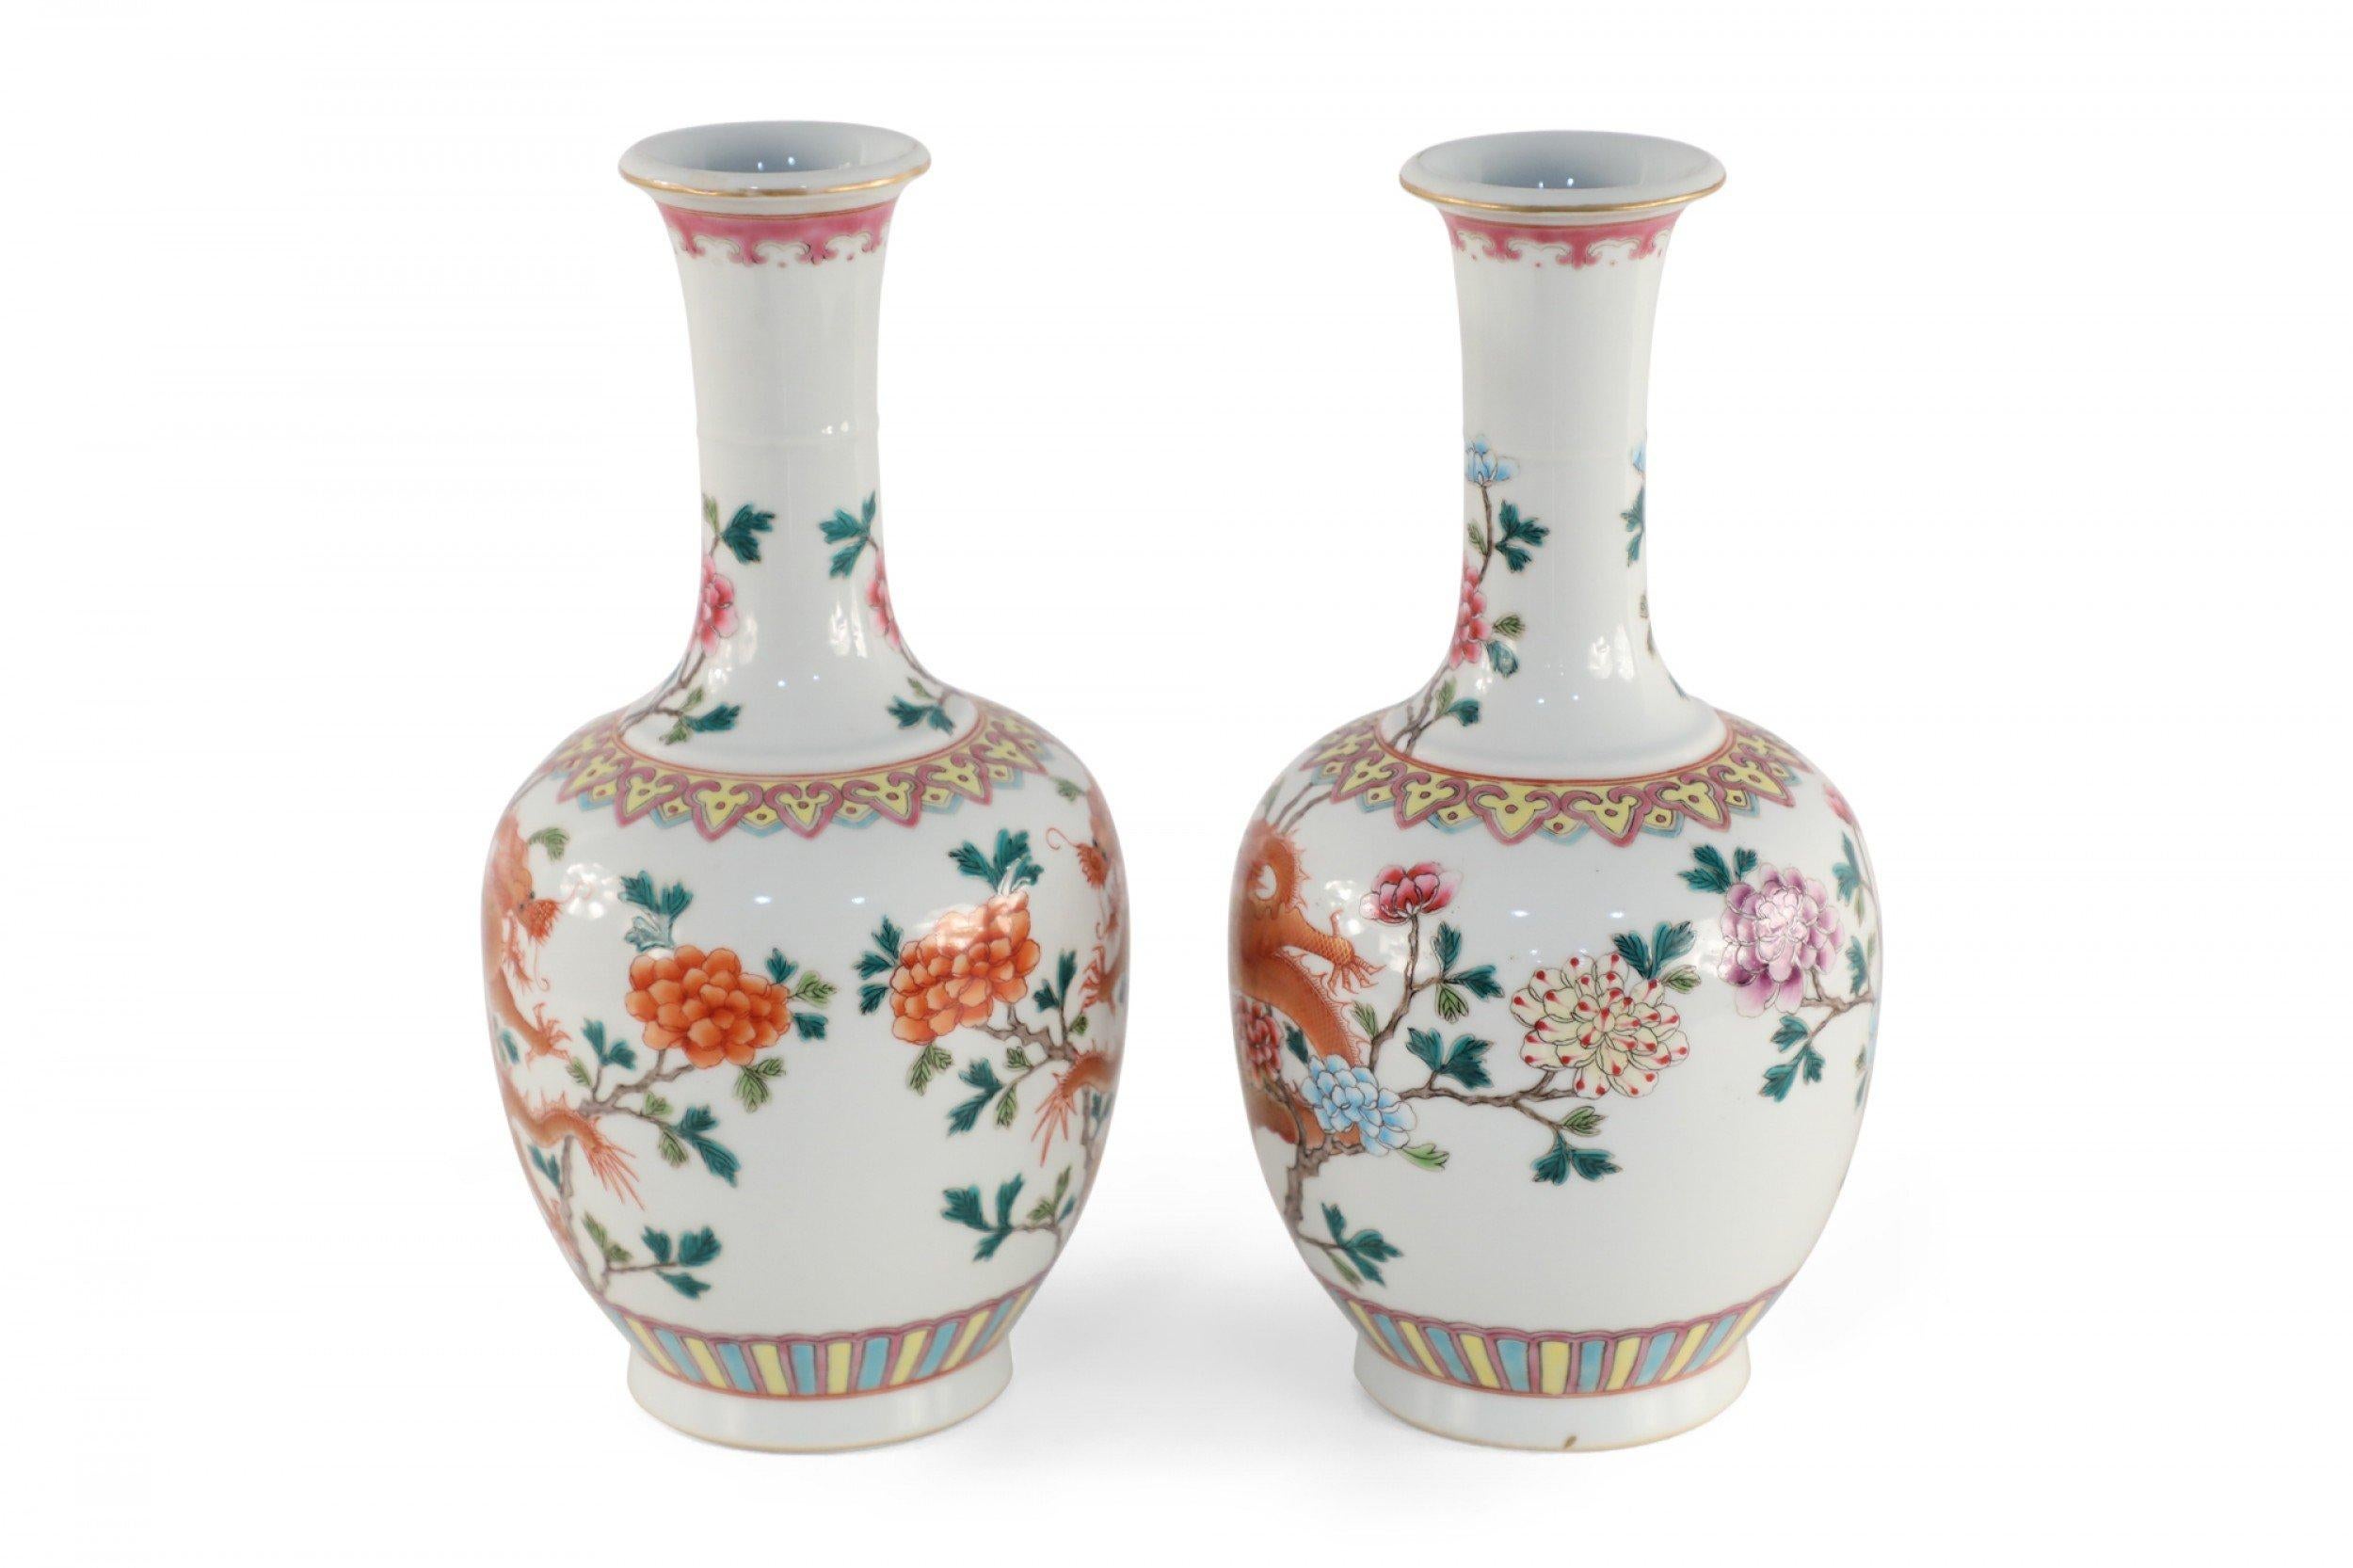 18th Century and Earlier Pair of Chinese Qing Dynasty Orange Dragon and Floral Motif Porcelain Vases